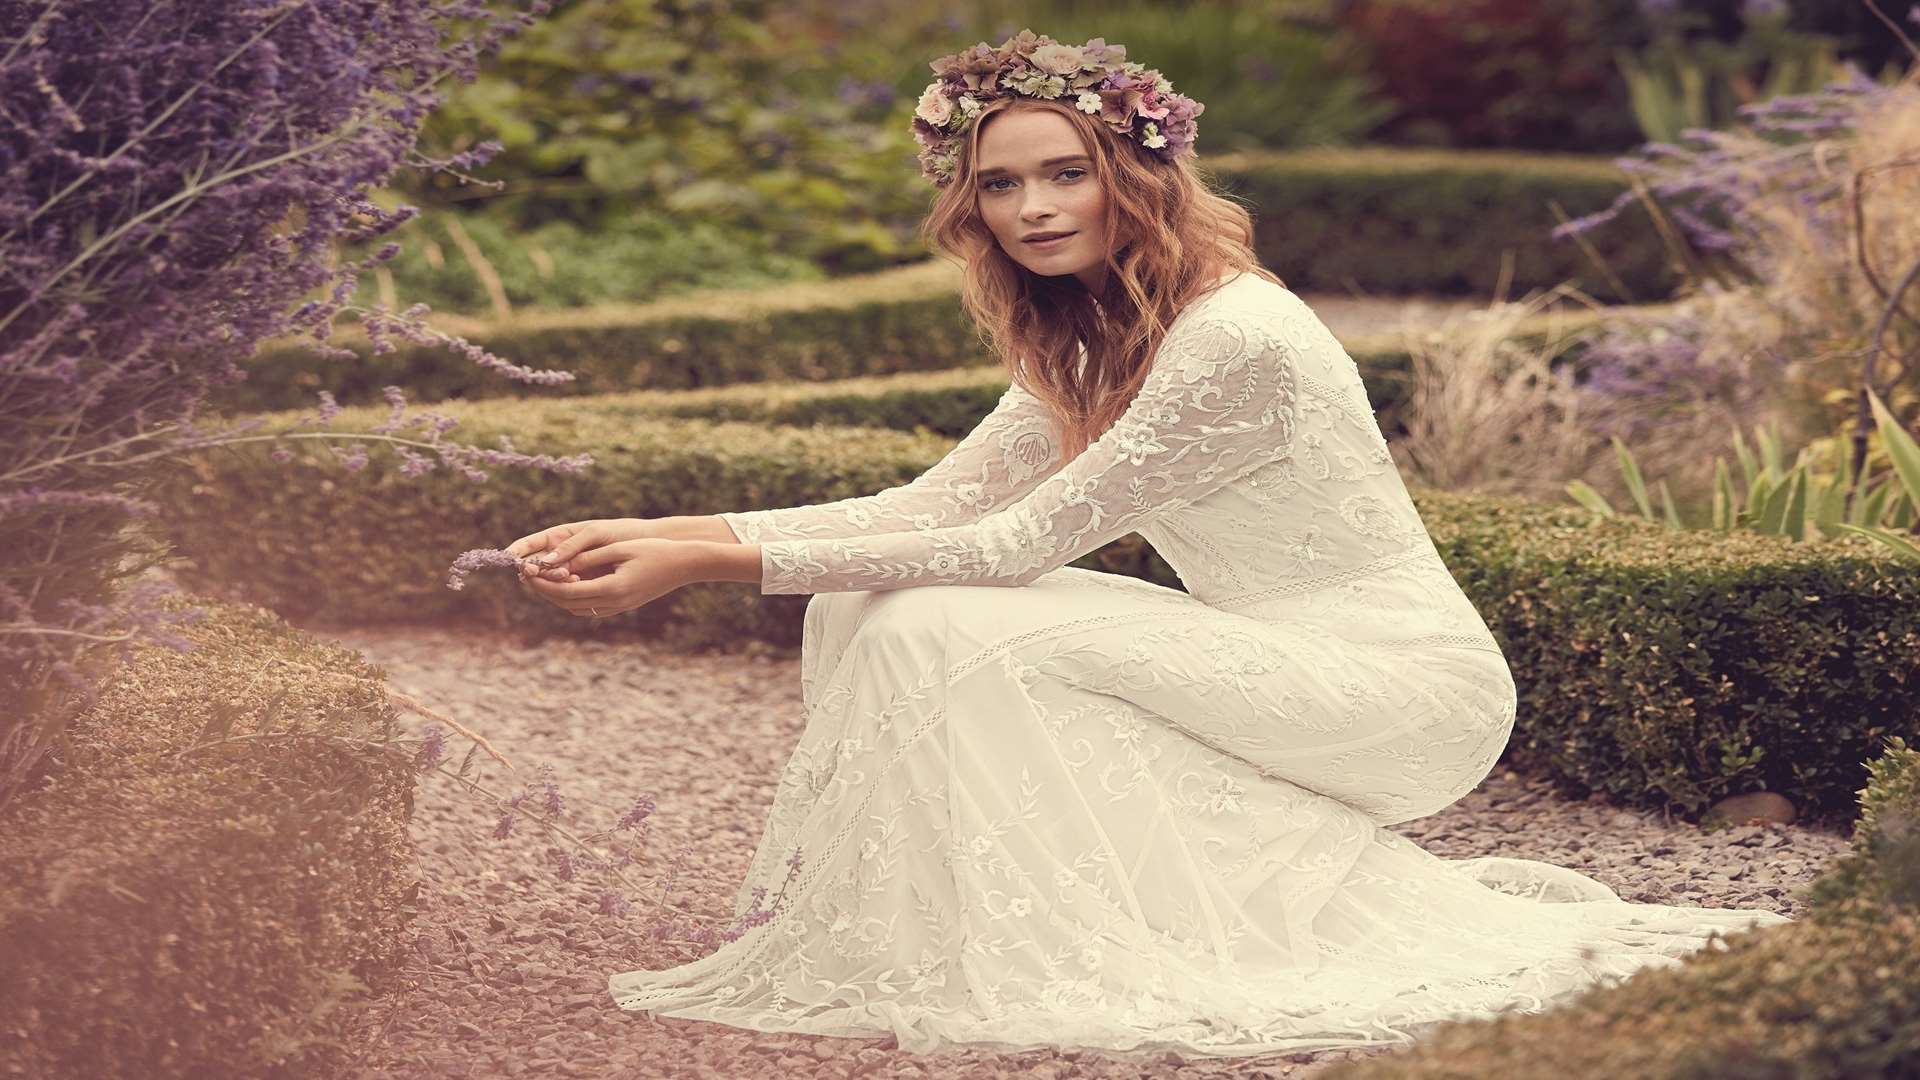 An ivory Eligenza lace bridal dress by Savannah Miller. Available from debenhams.com